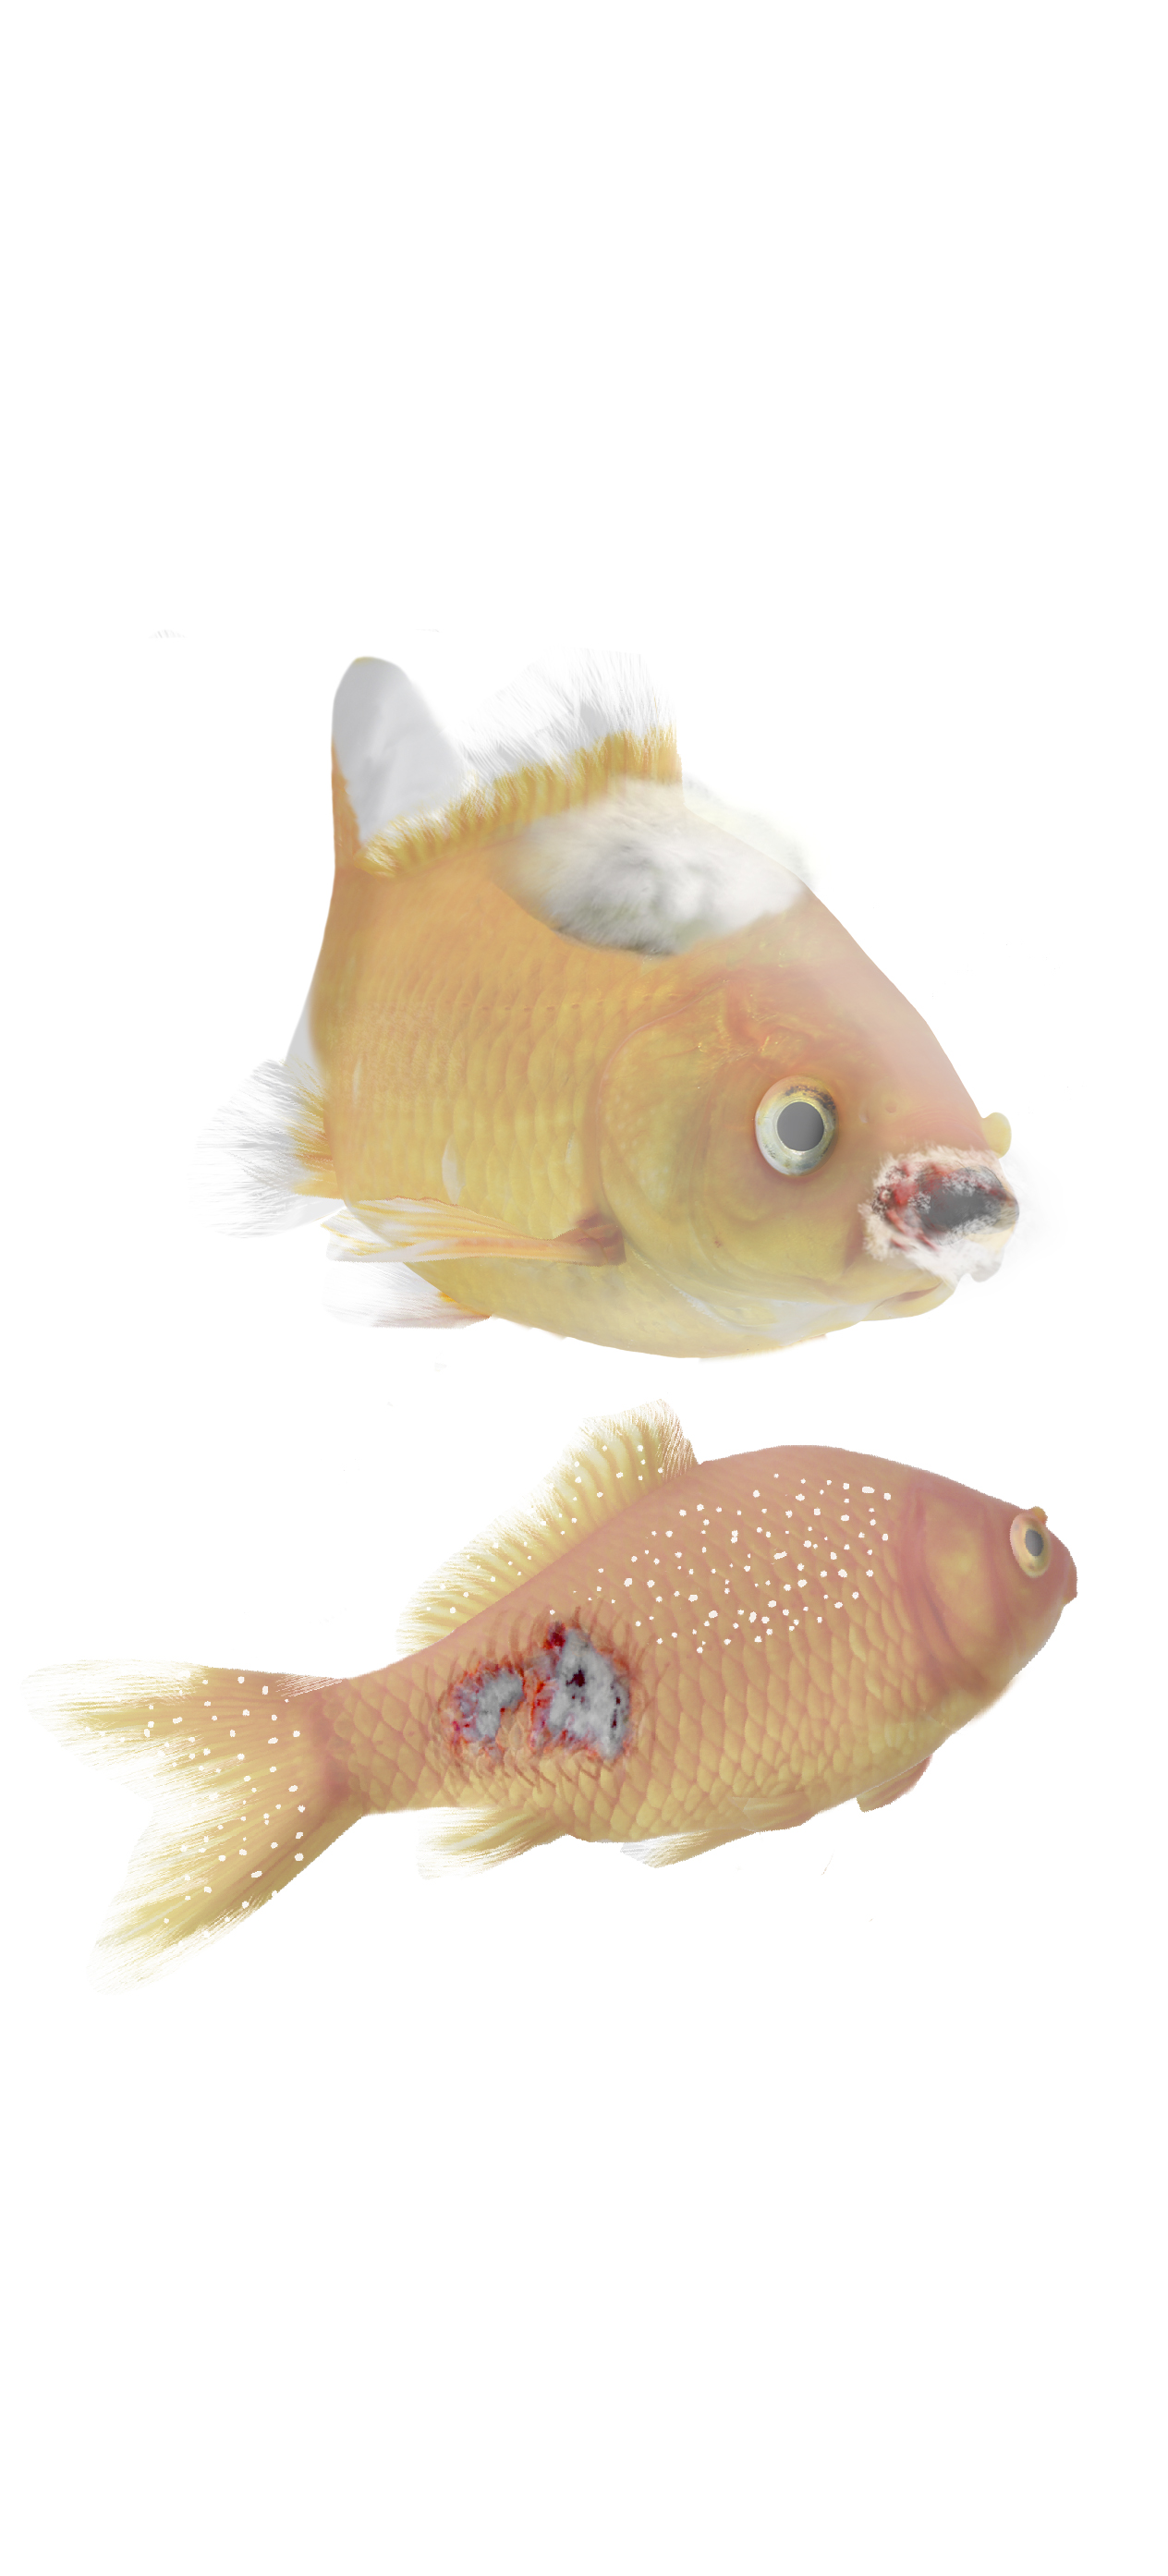 2 Goldfish looking pale in colour with multiple disease symptoms: sore open wounds, ulcers, white specks, fluffy grey/white growths to the mouth and body, tattered and frayed fins